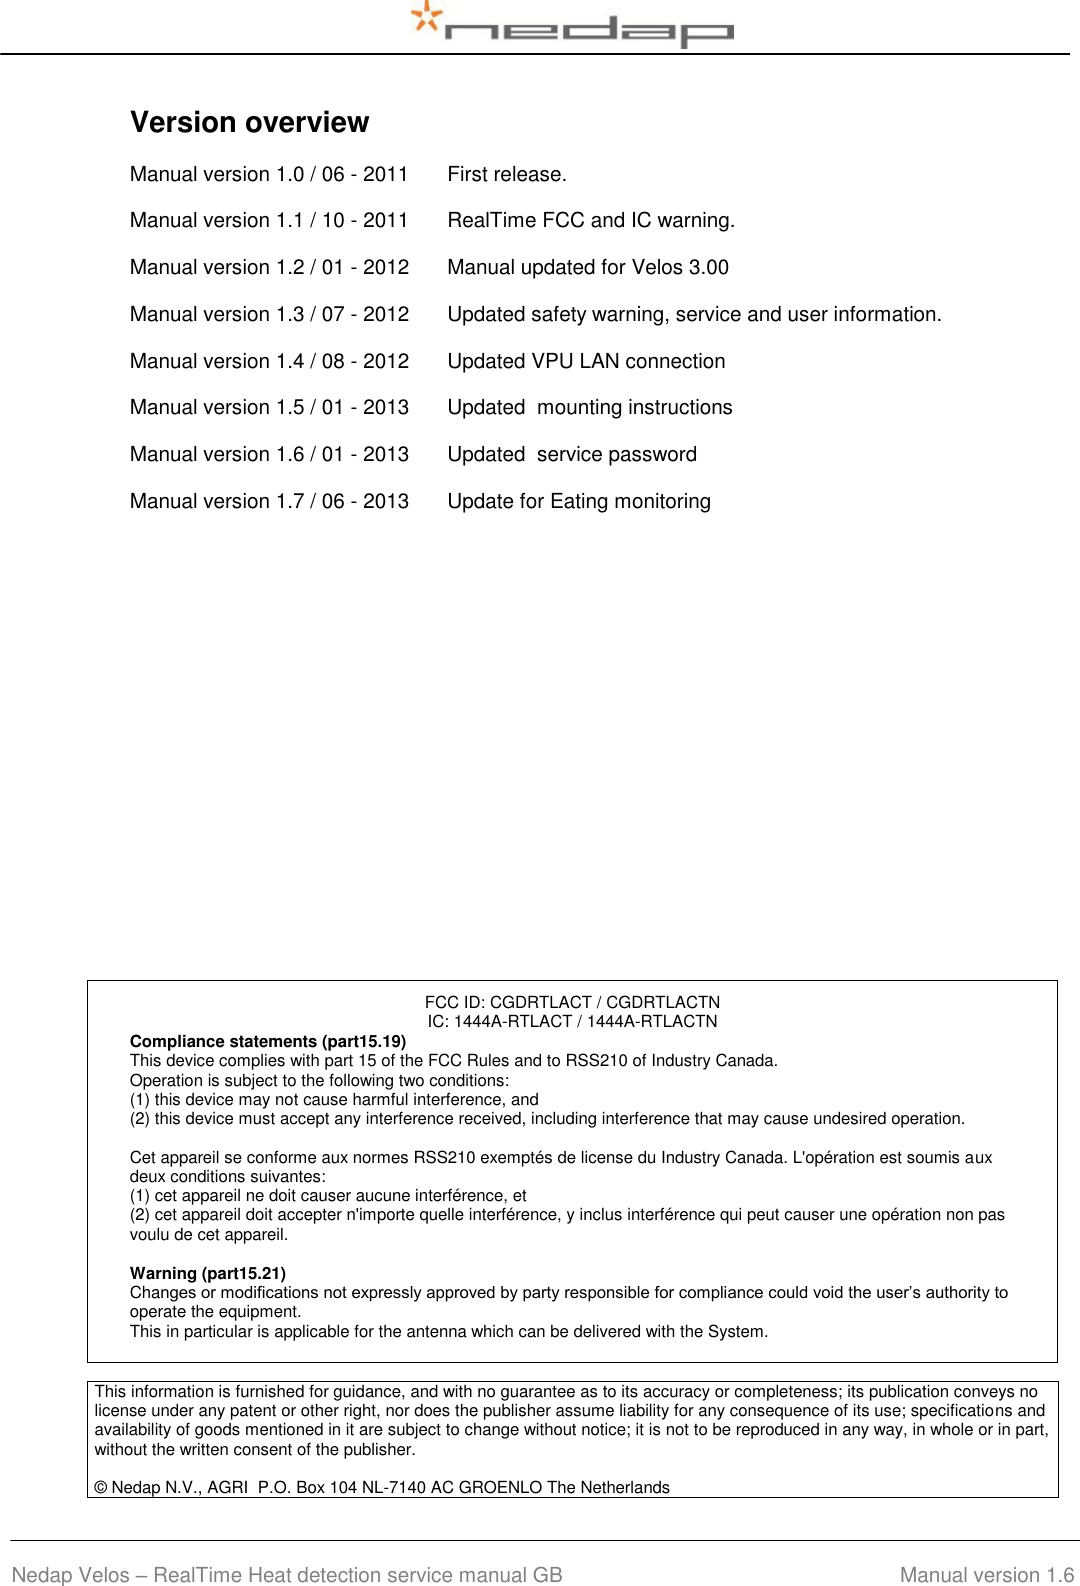  Nedap Velos – RealTime Heat detection service manual GB                                         Manual version 1.6 Version overview  Manual version 1.0 / 06 - 2011 First release. Manual version 1.1 / 10 - 2011 RealTime FCC and IC warning. Manual version 1.2 / 01 - 2012 Manual updated for Velos 3.00 Manual version 1.3 / 07 - 2012 Updated safety warning, service and user information. Manual version 1.4 / 08 - 2012 Updated VPU LAN connection Manual version 1.5 / 01 - 2013 Updated  mounting instructions Manual version 1.6 / 01 - 2013 Updated  service password Manual version 1.7 / 06 - 2013 Update for Eating monitoring                     FCC ID: CGDRTLACT / CGDRTLACTN IC: 1444A-RTLACT / 1444A-RTLACTN Compliance statements (part15.19) This device complies with part 15 of the FCC Rules and to RSS210 of Industry Canada. Operation is subject to the following two conditions: (1) this device may not cause harmful interference, and (2) this device must accept any interference received, including interference that may cause undesired operation.  Cet appareil se conforme aux normes RSS210 exemptés de license du Industry Canada. L&apos;opération est soumis aux deux conditions suivantes: (1) cet appareil ne doit causer aucune interférence, et  (2) cet appareil doit accepter n&apos;importe quelle interférence, y inclus interférence qui peut causer une opération non pas voulu de cet appareil.  Warning (part15.21) Changes or modifications not expressly approved by party responsible for compliance could void the user’s authority to operate the equipment. This in particular is applicable for the antenna which can be delivered with the System. This information is furnished for guidance, and with no guarantee as to its accuracy or completeness; its publication conveys no license under any patent or other right, nor does the publisher assume liability for any consequence of its use; specifications and availability of goods mentioned in it are subject to change without notice; it is not to be reproduced in any way, in whole or in part, without the written consent of the publisher.  © Nedap N.V., AGRI  P.O. Box 104 NL-7140 AC GROENLO The Netherlands     